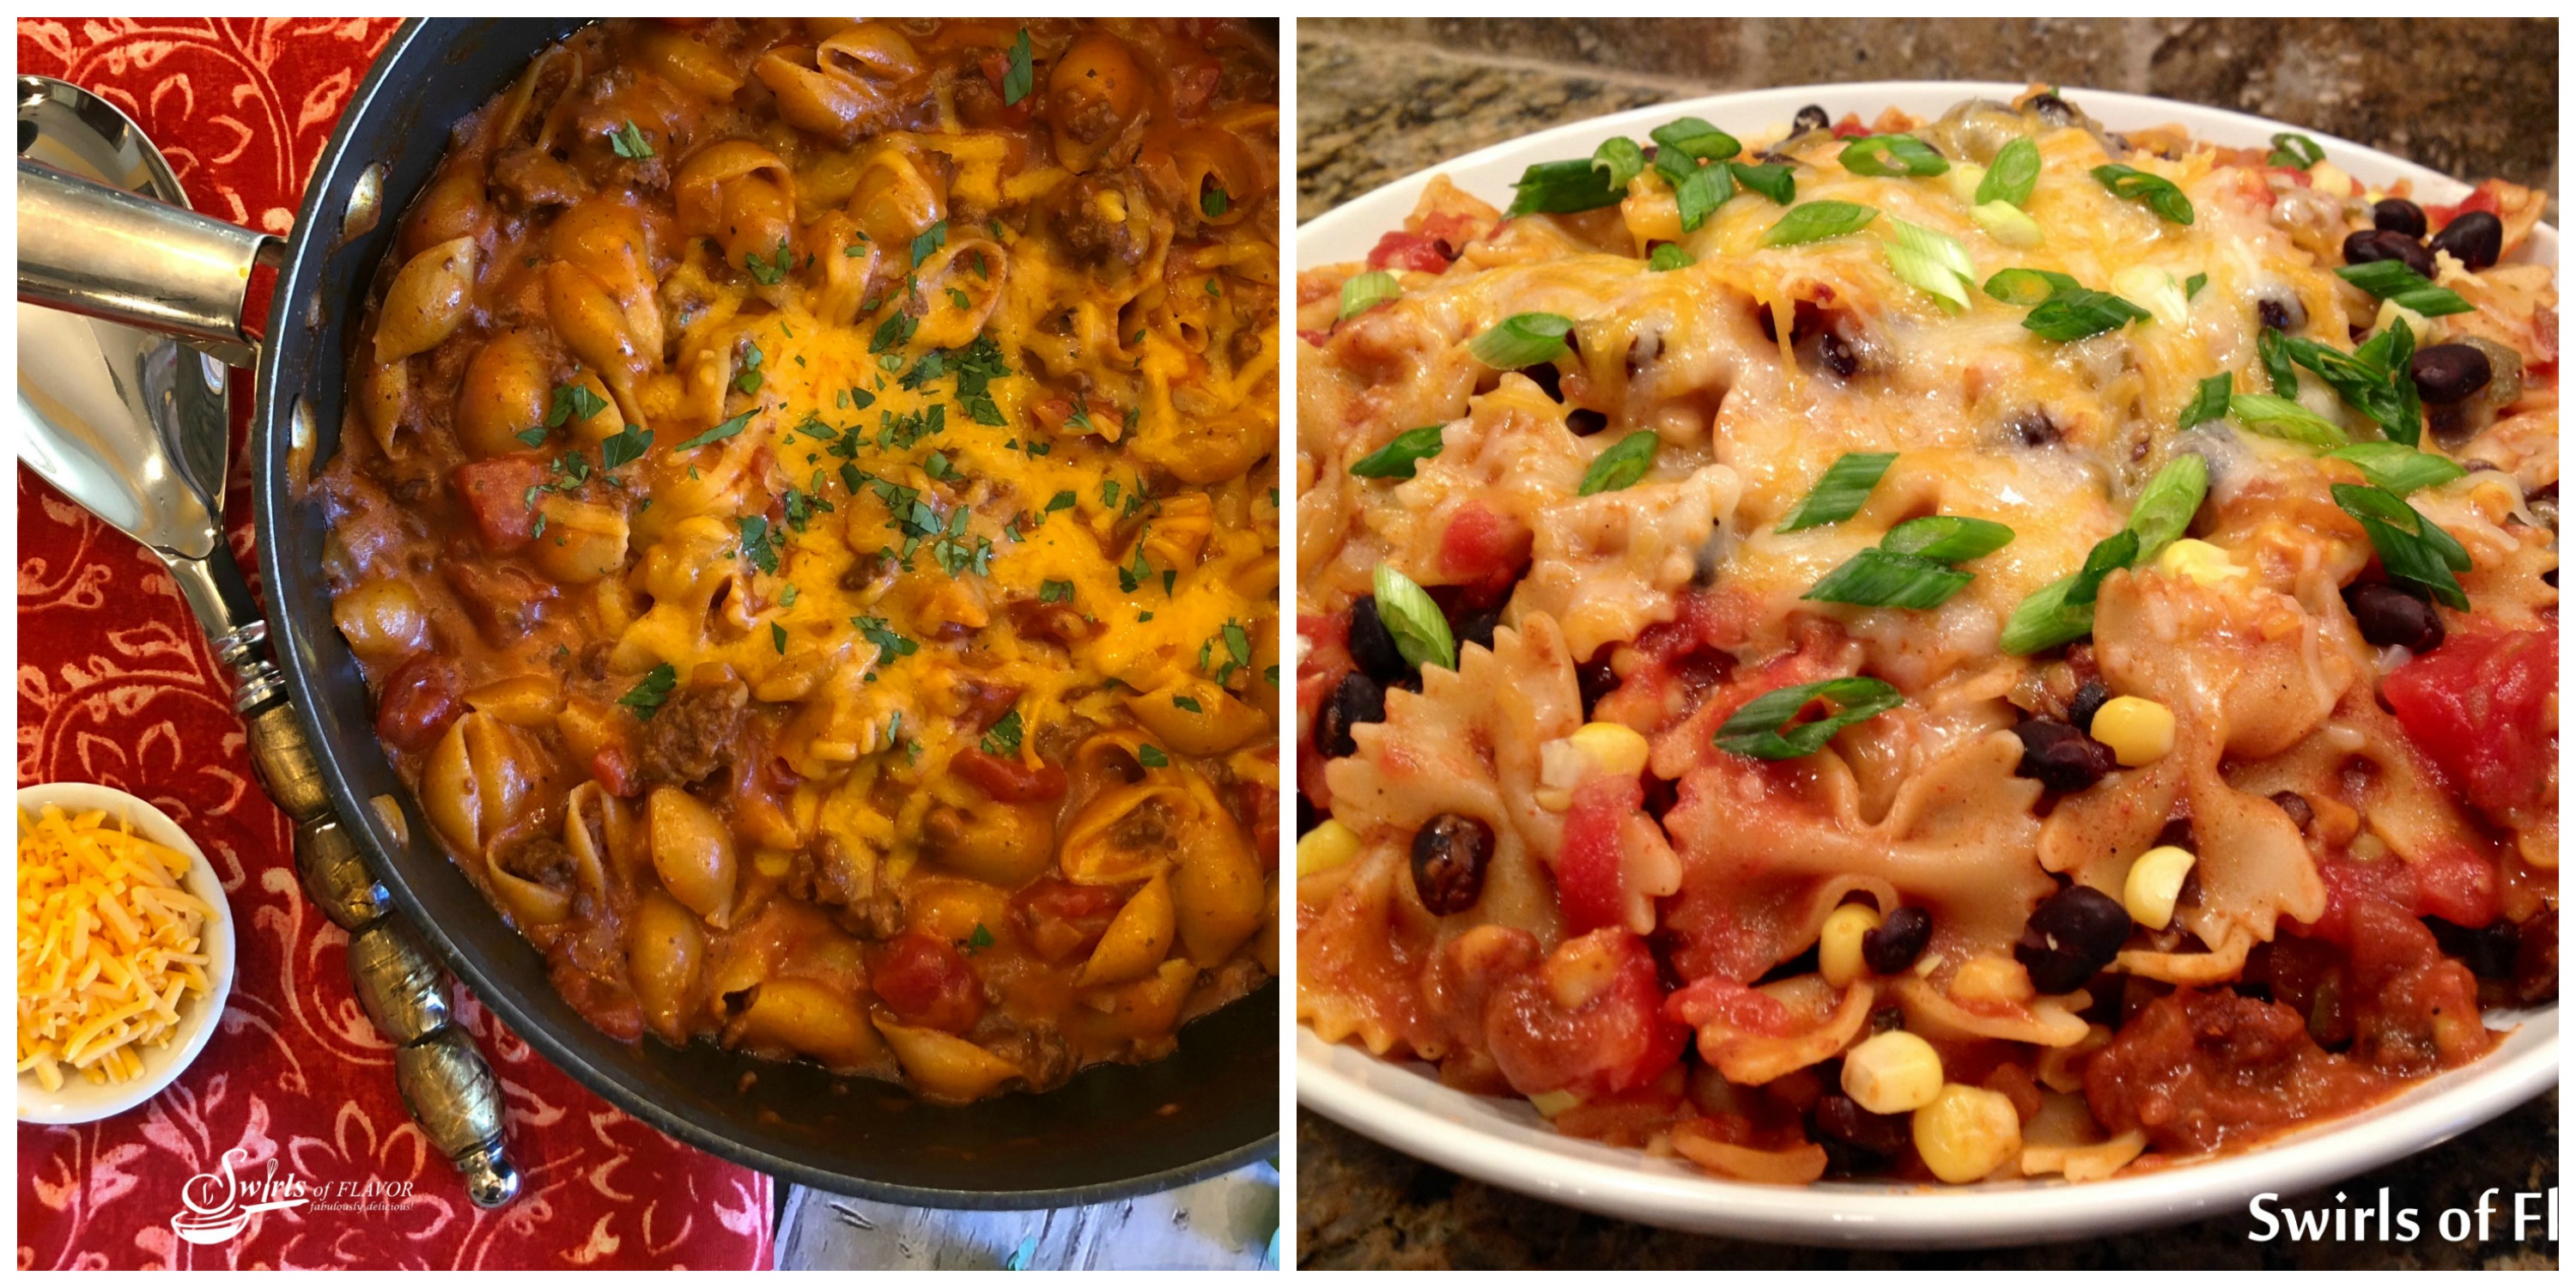 chili Mac and Cheese and Mexicali Bowtie Pasta